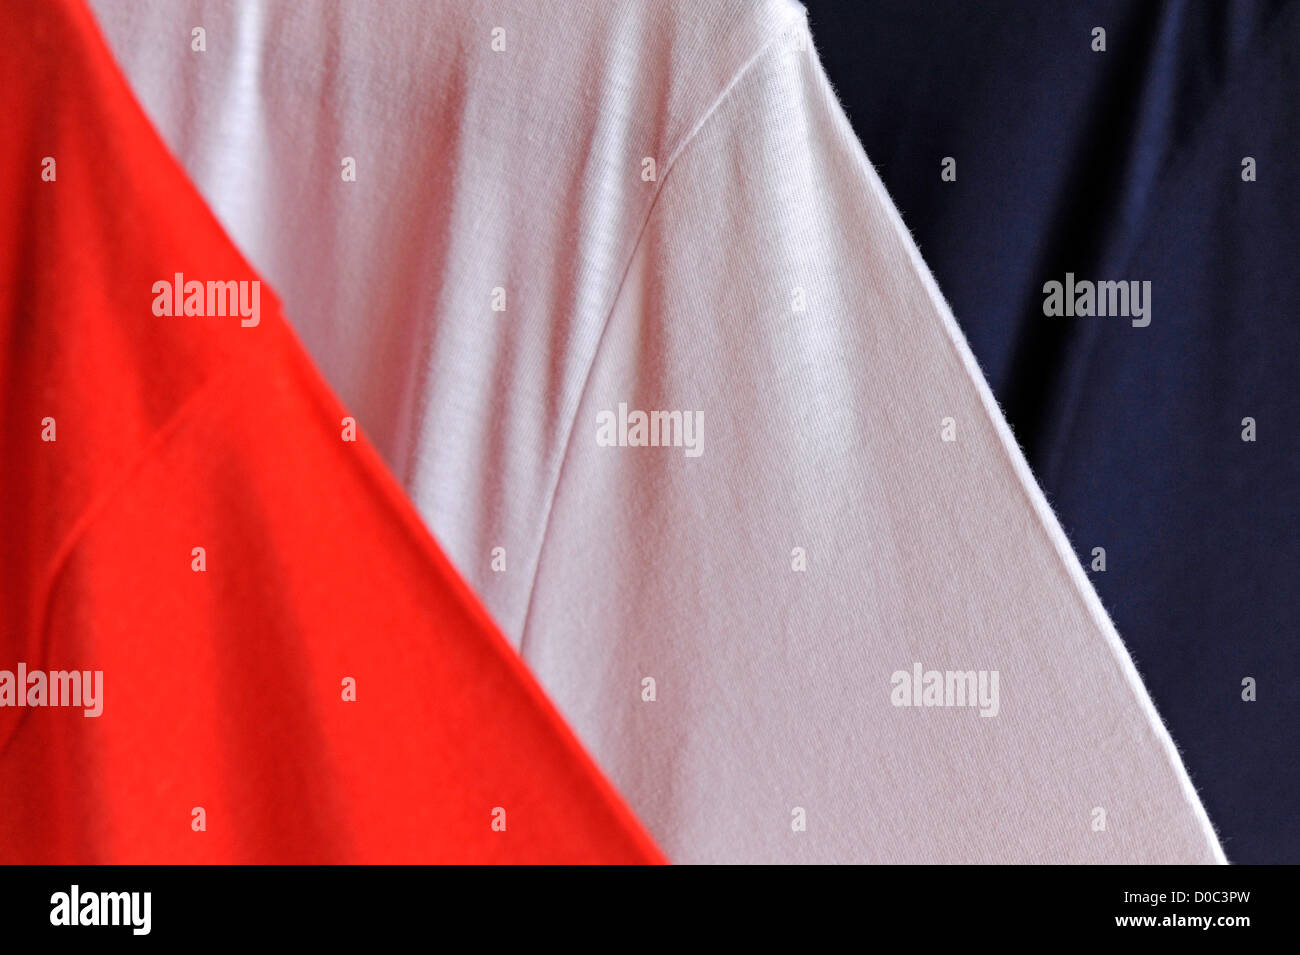 Close-up of three t-shirts (red, white, blue) Stock Photo